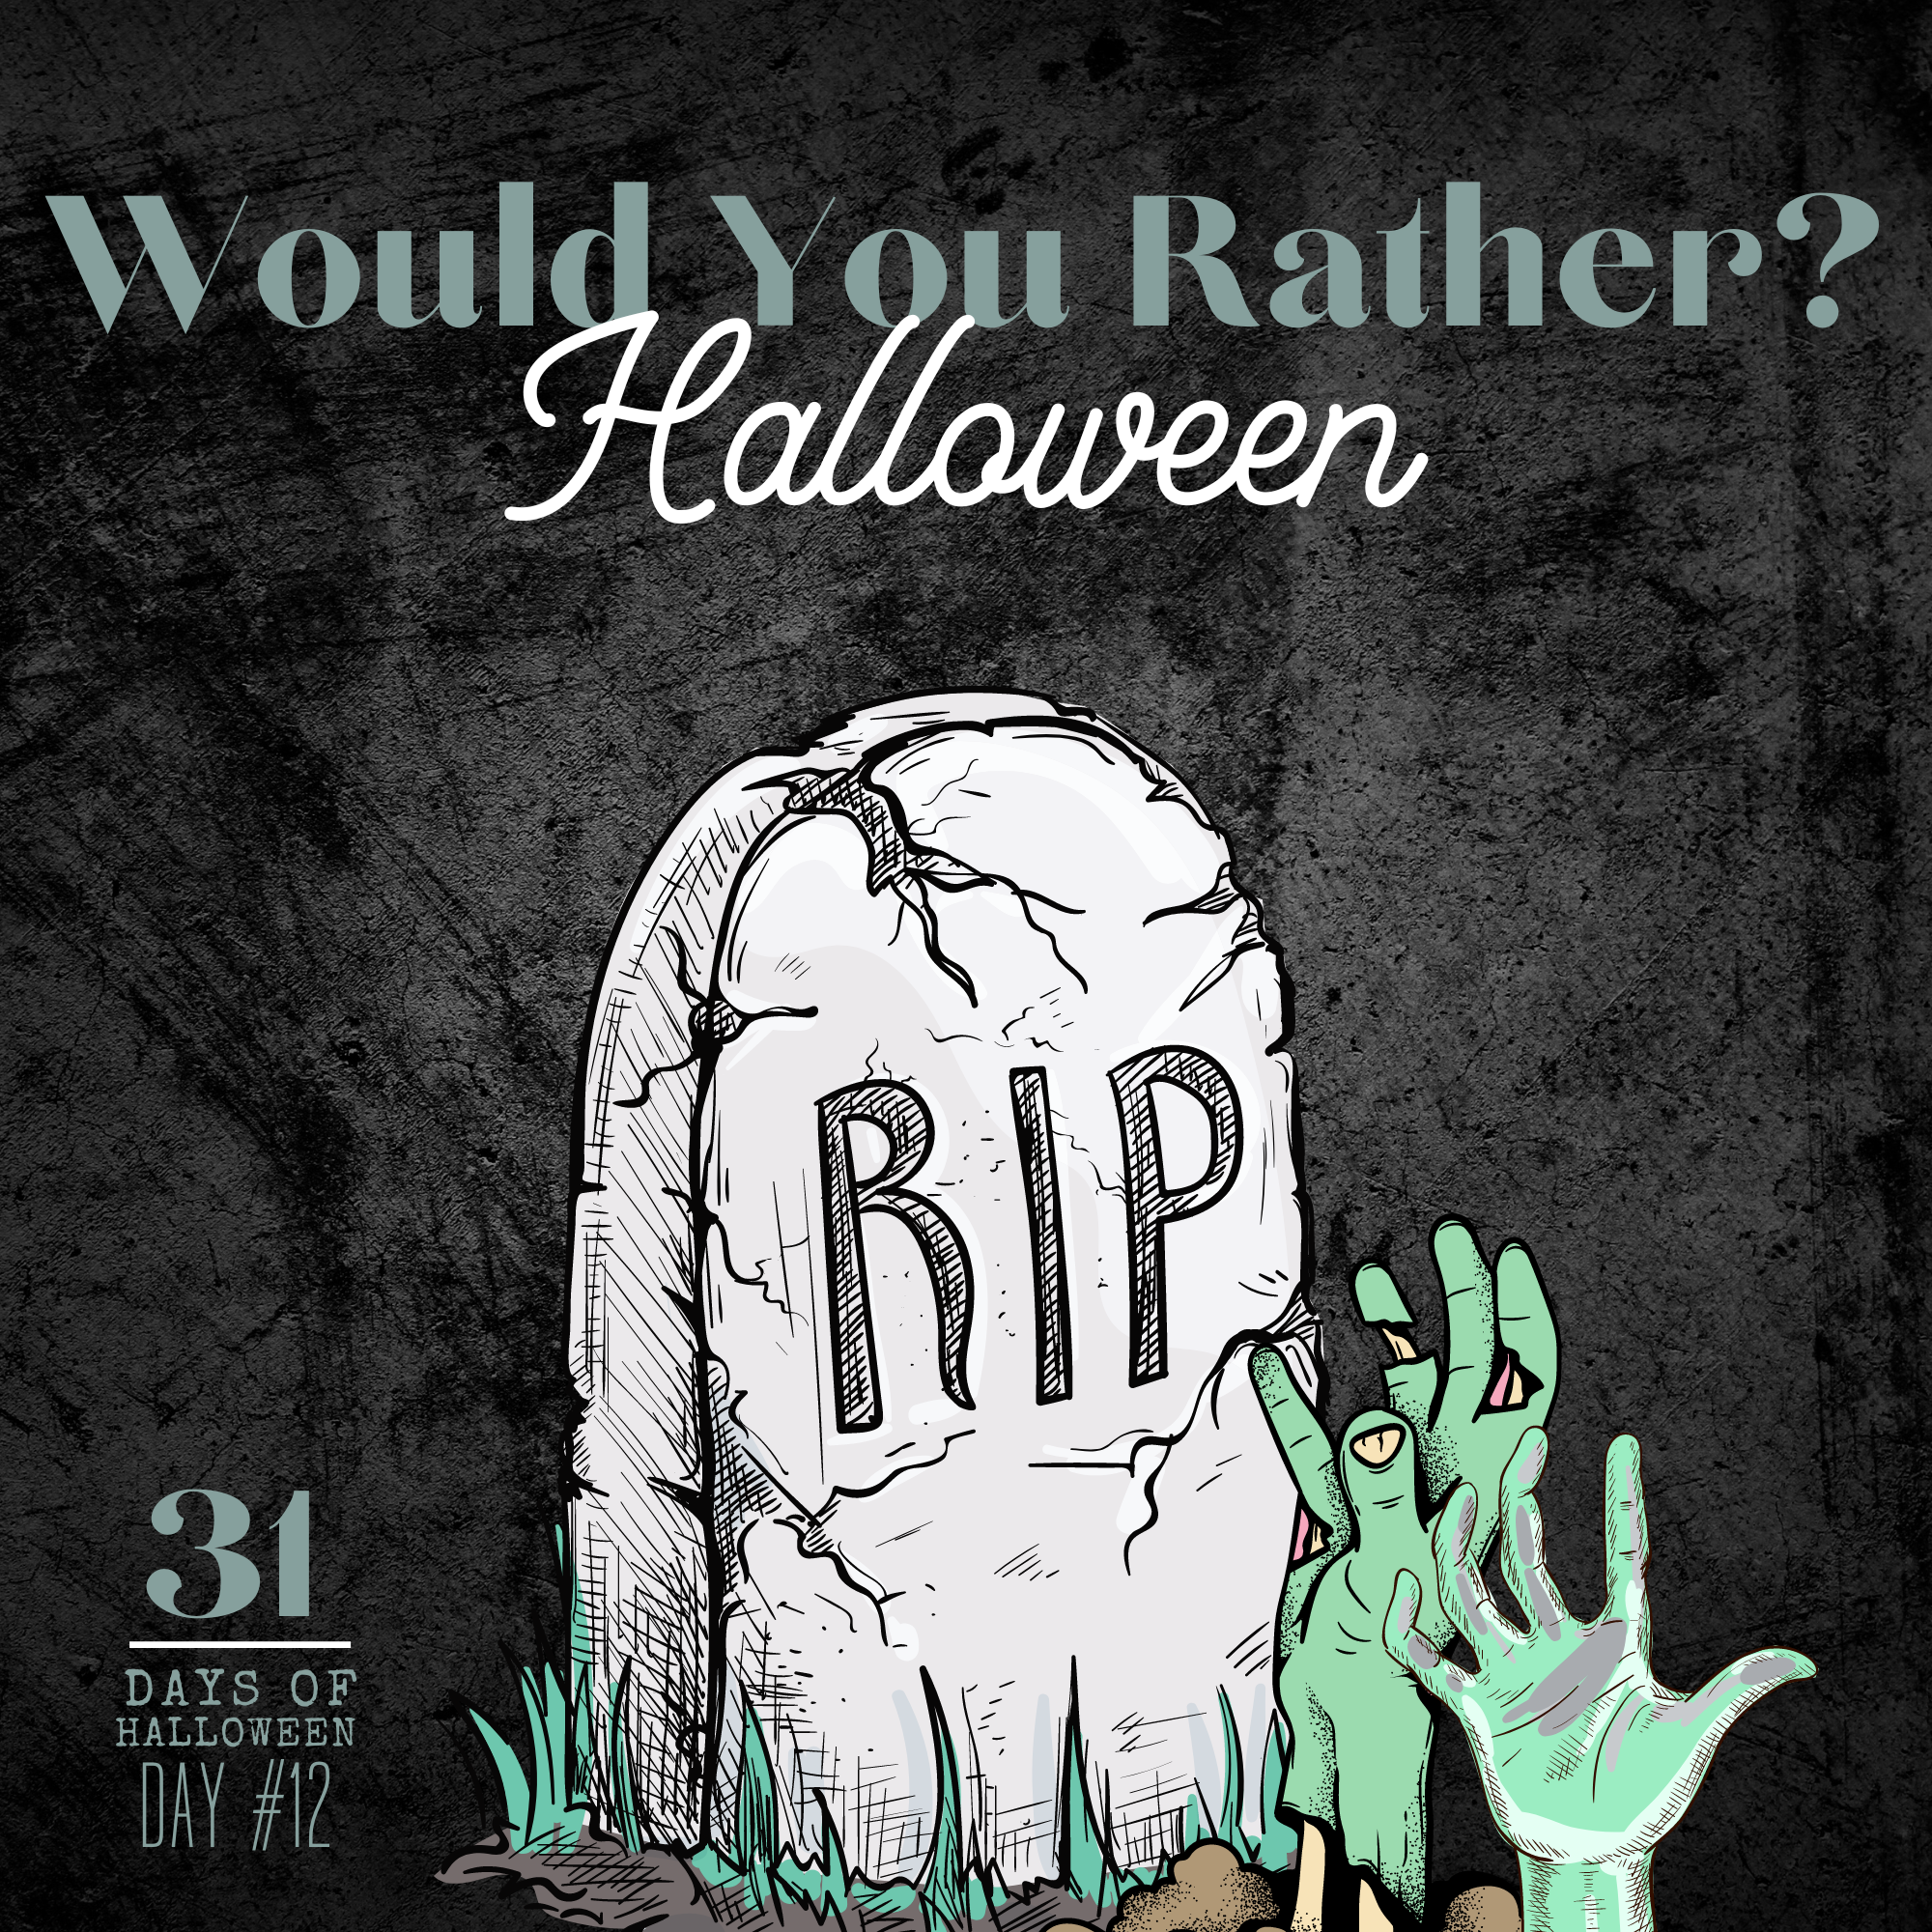 31 Days of Halloween: Day #12 …Would You Rather for Halloween